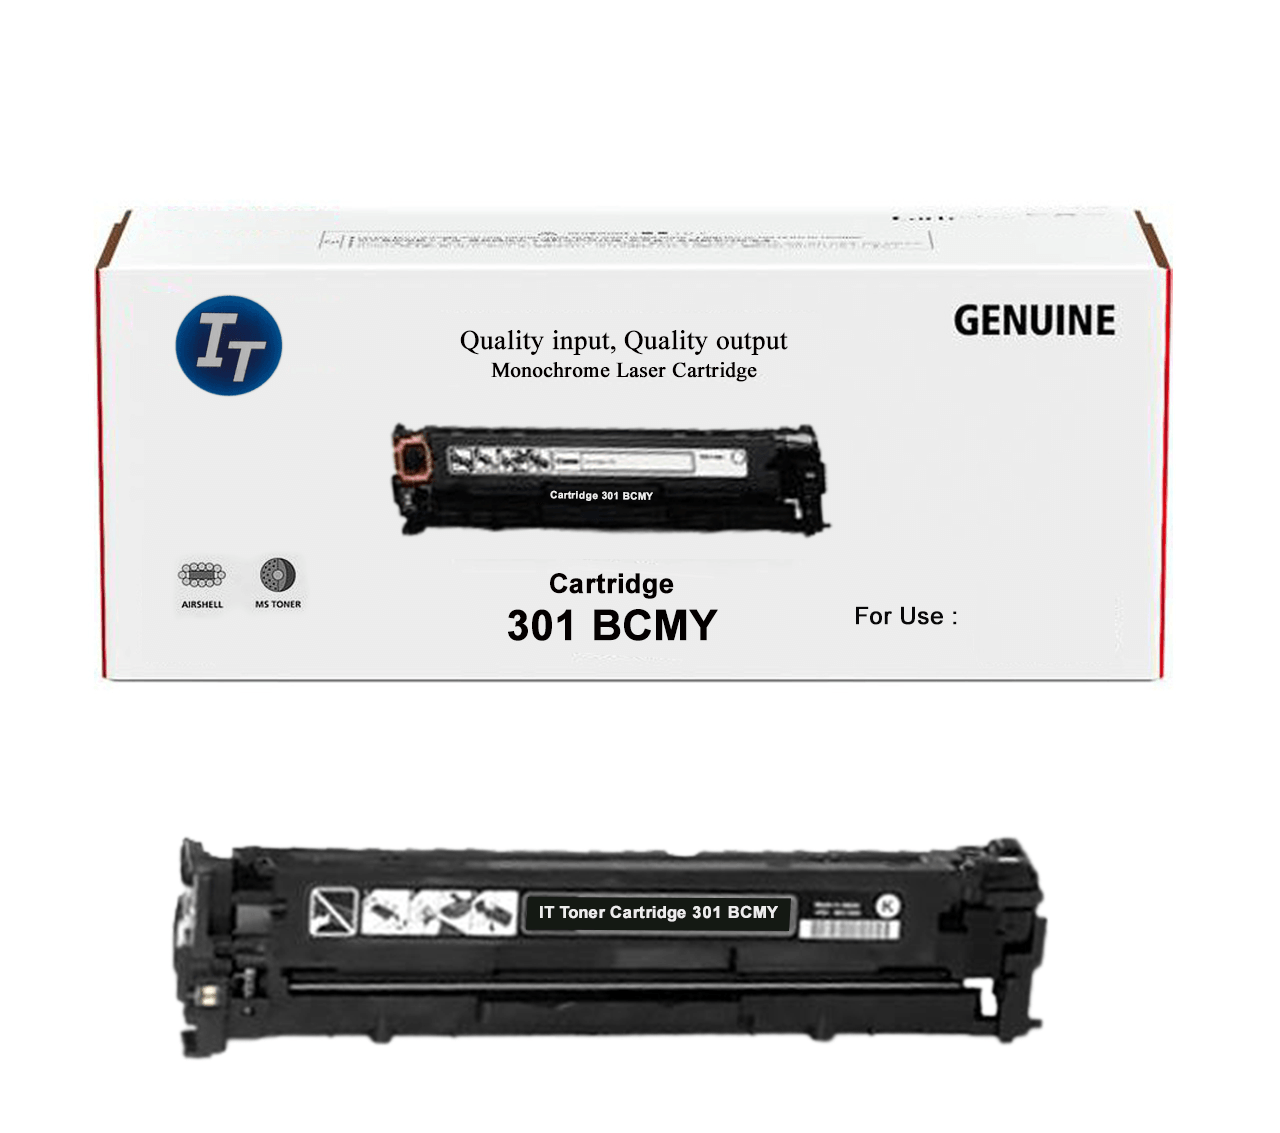 IT Toner Cartridge Canon 301 BCMY (7).png